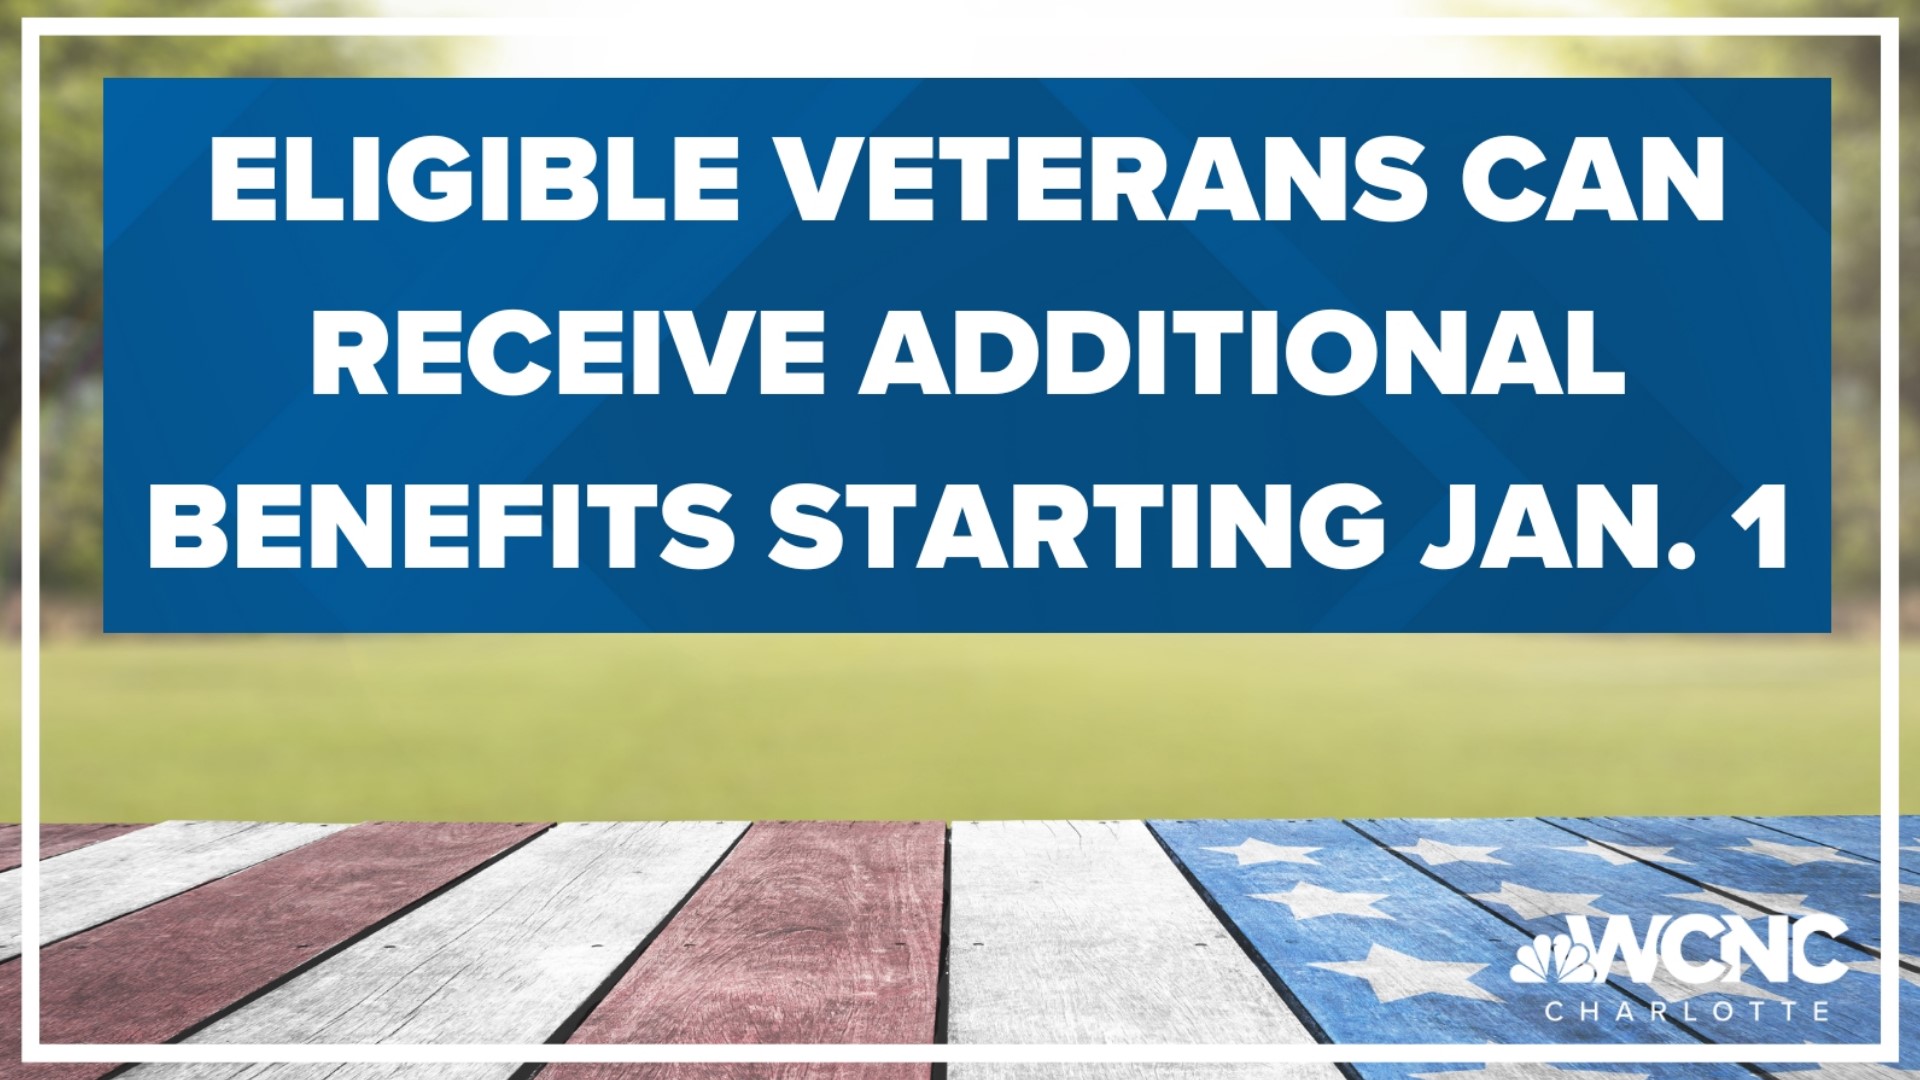 Come the new year, thousands of South Carolina veterans are in for more benefits.